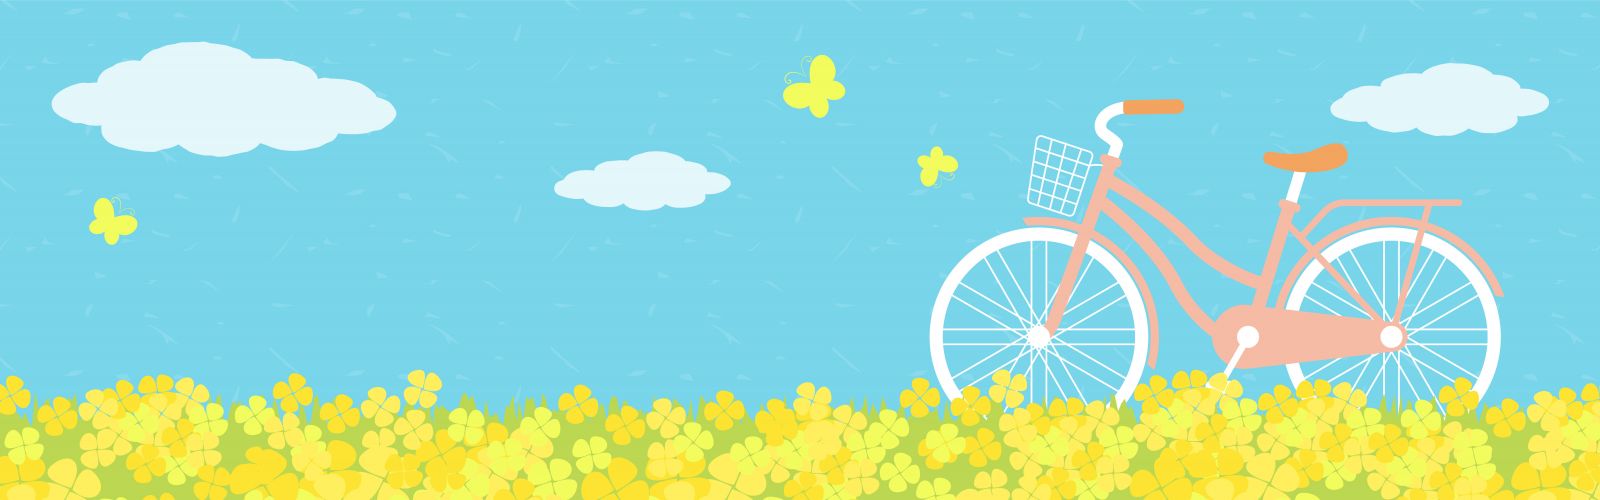 Cartoon image of a bicycle in the countryside banner image